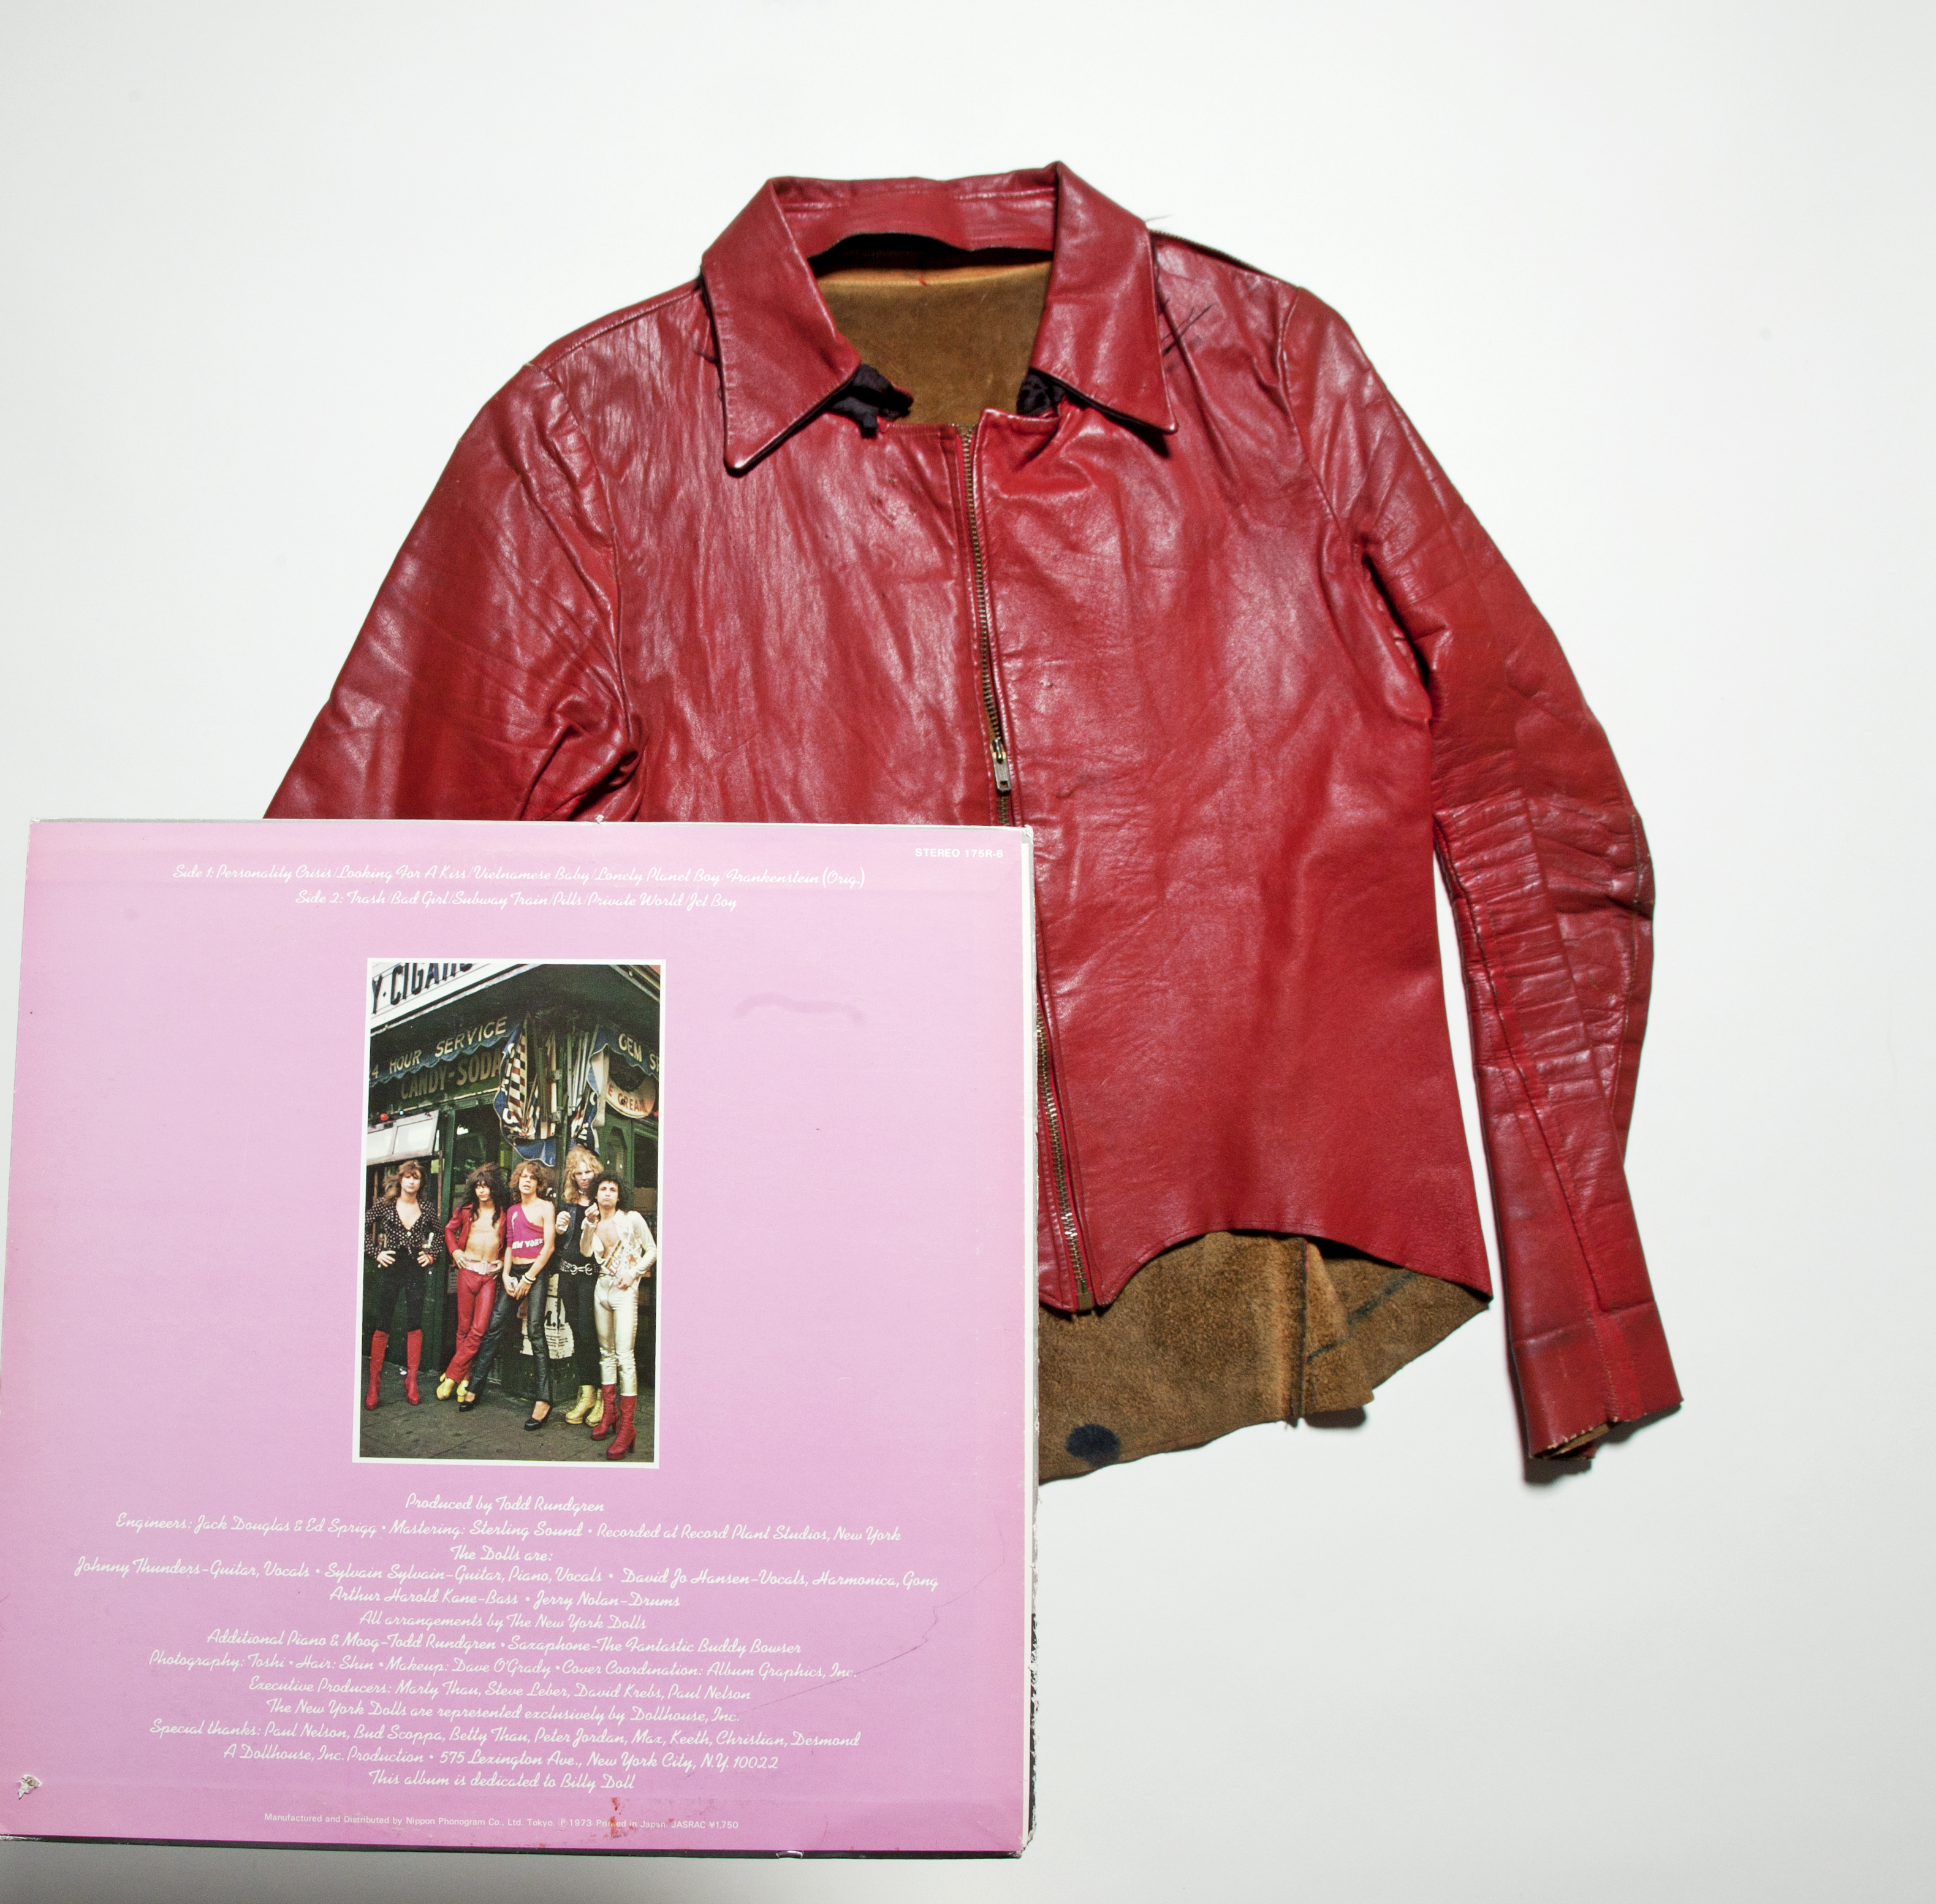 A jacket that belonged to guitarist Johnny Thunders